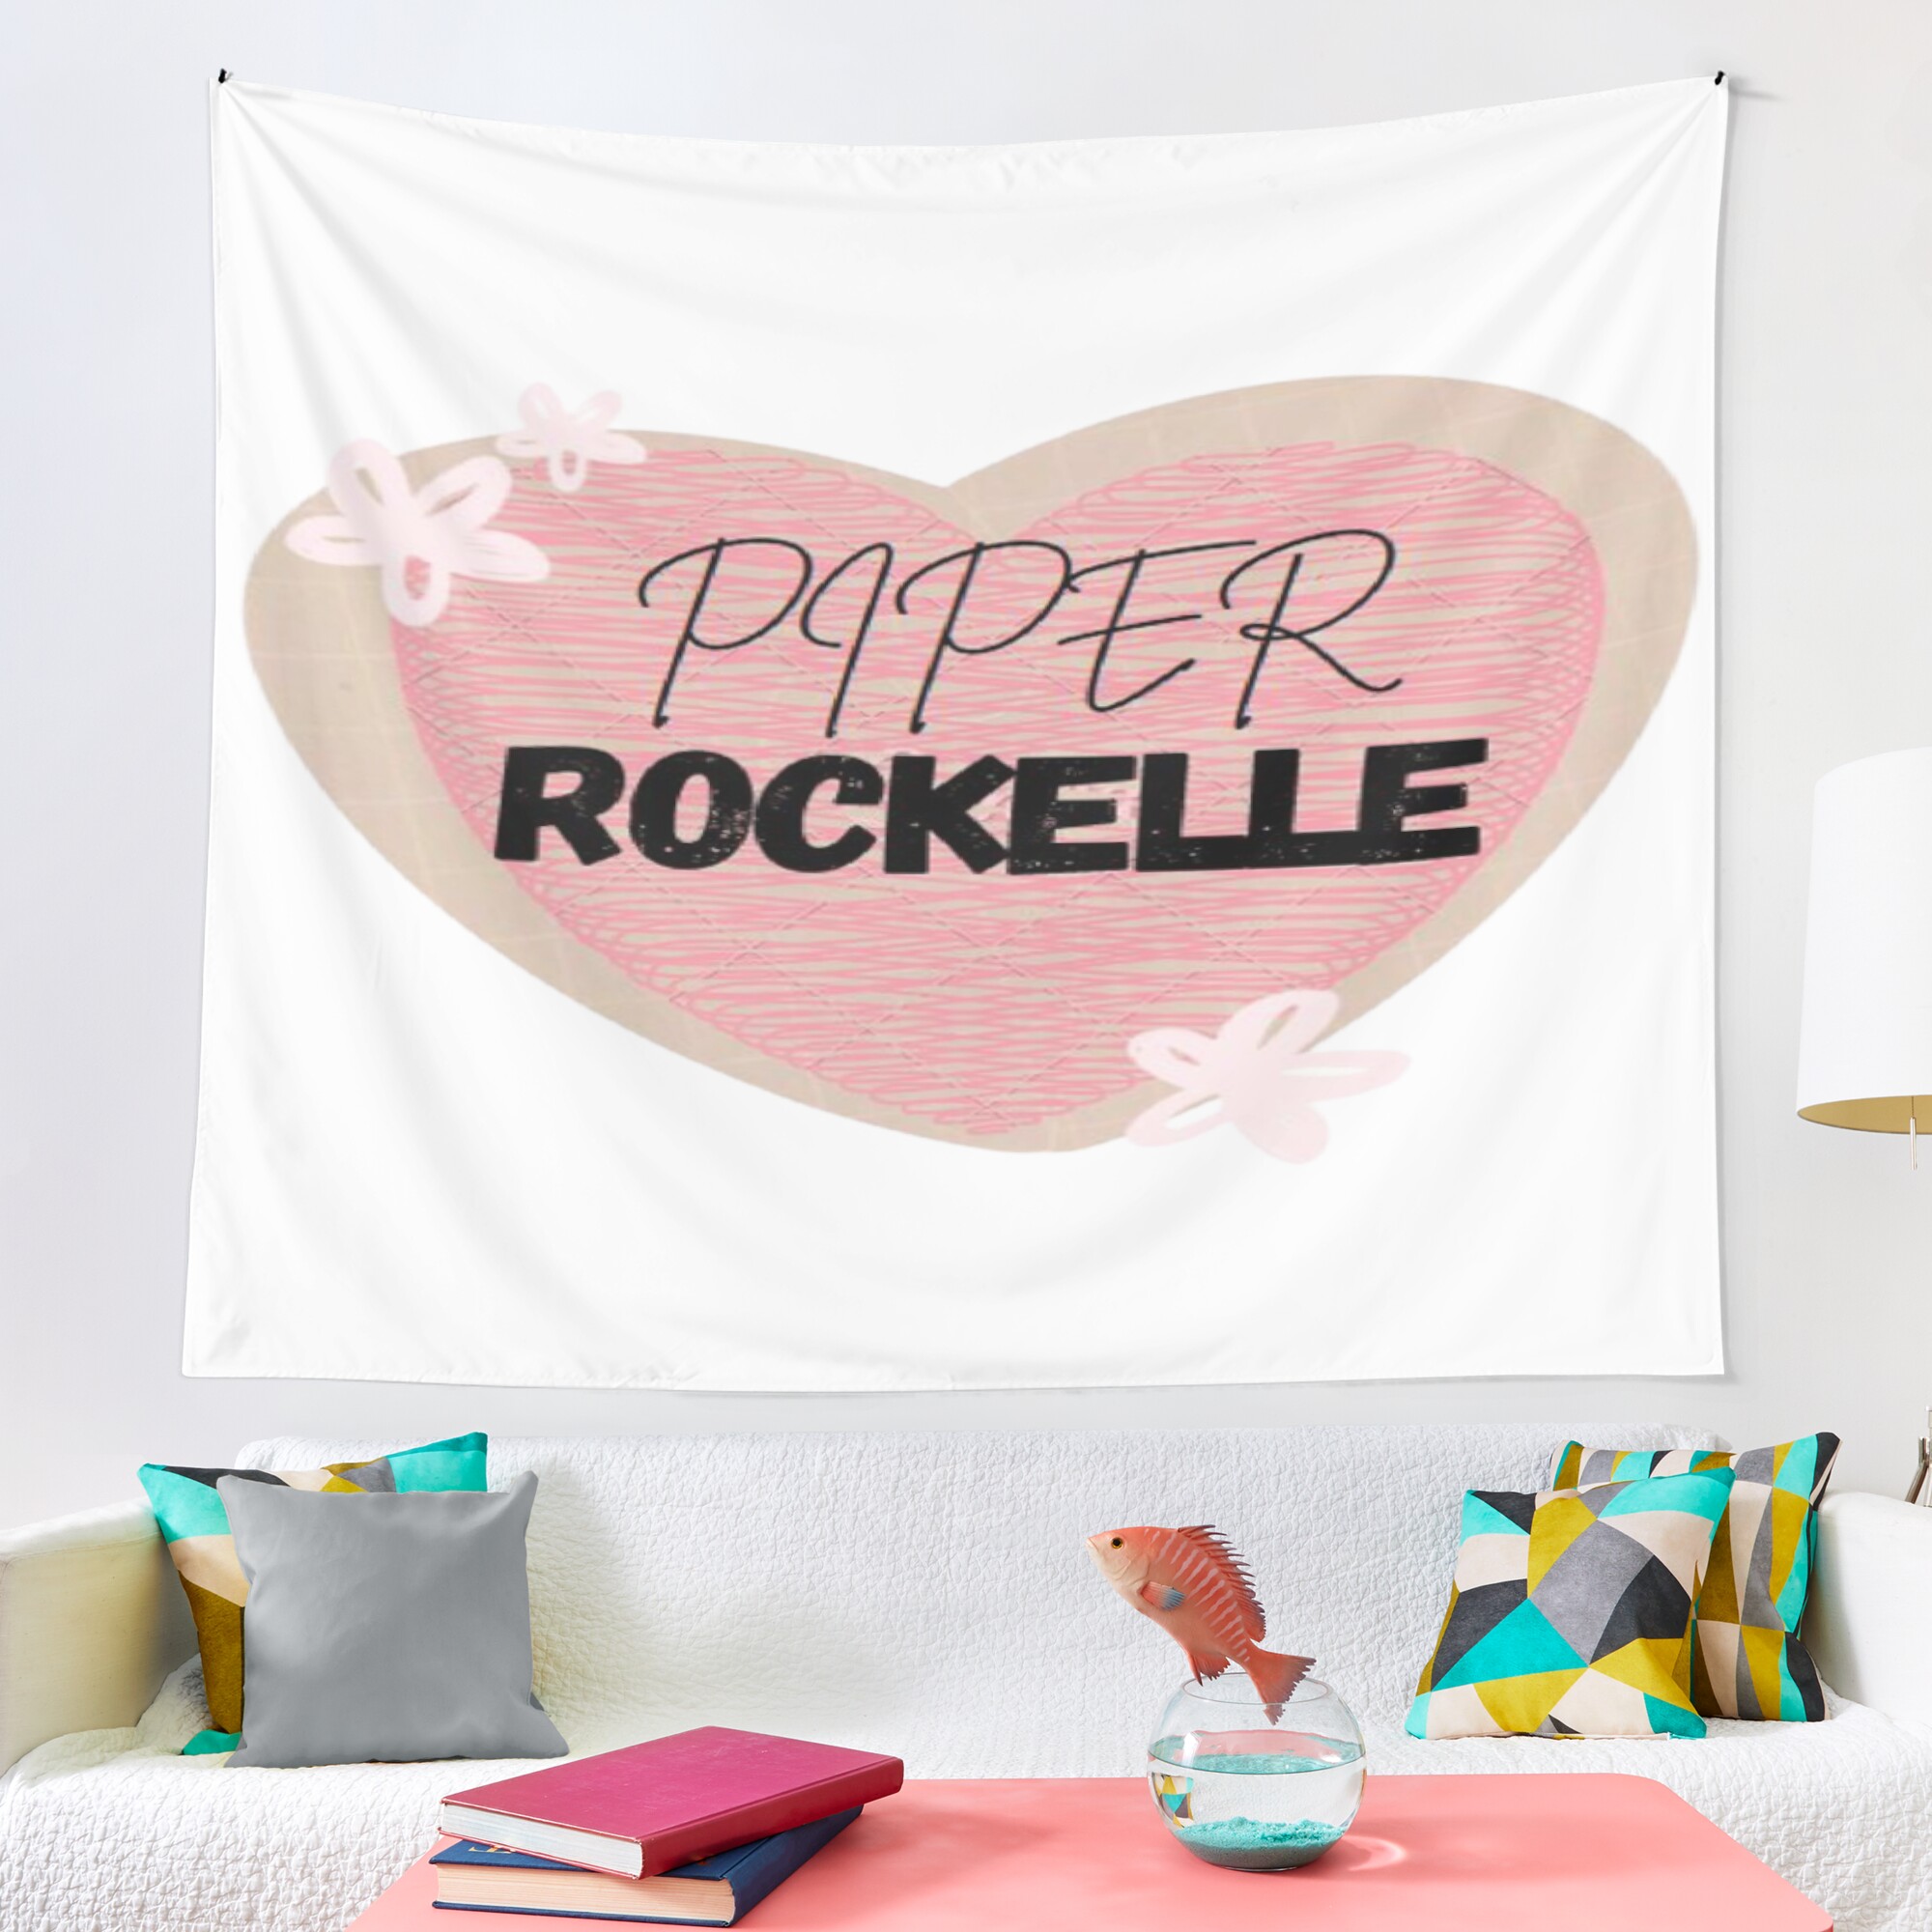 urtapestry lifestyle largesquare2000x2000 17 - Piper Rockelle Store